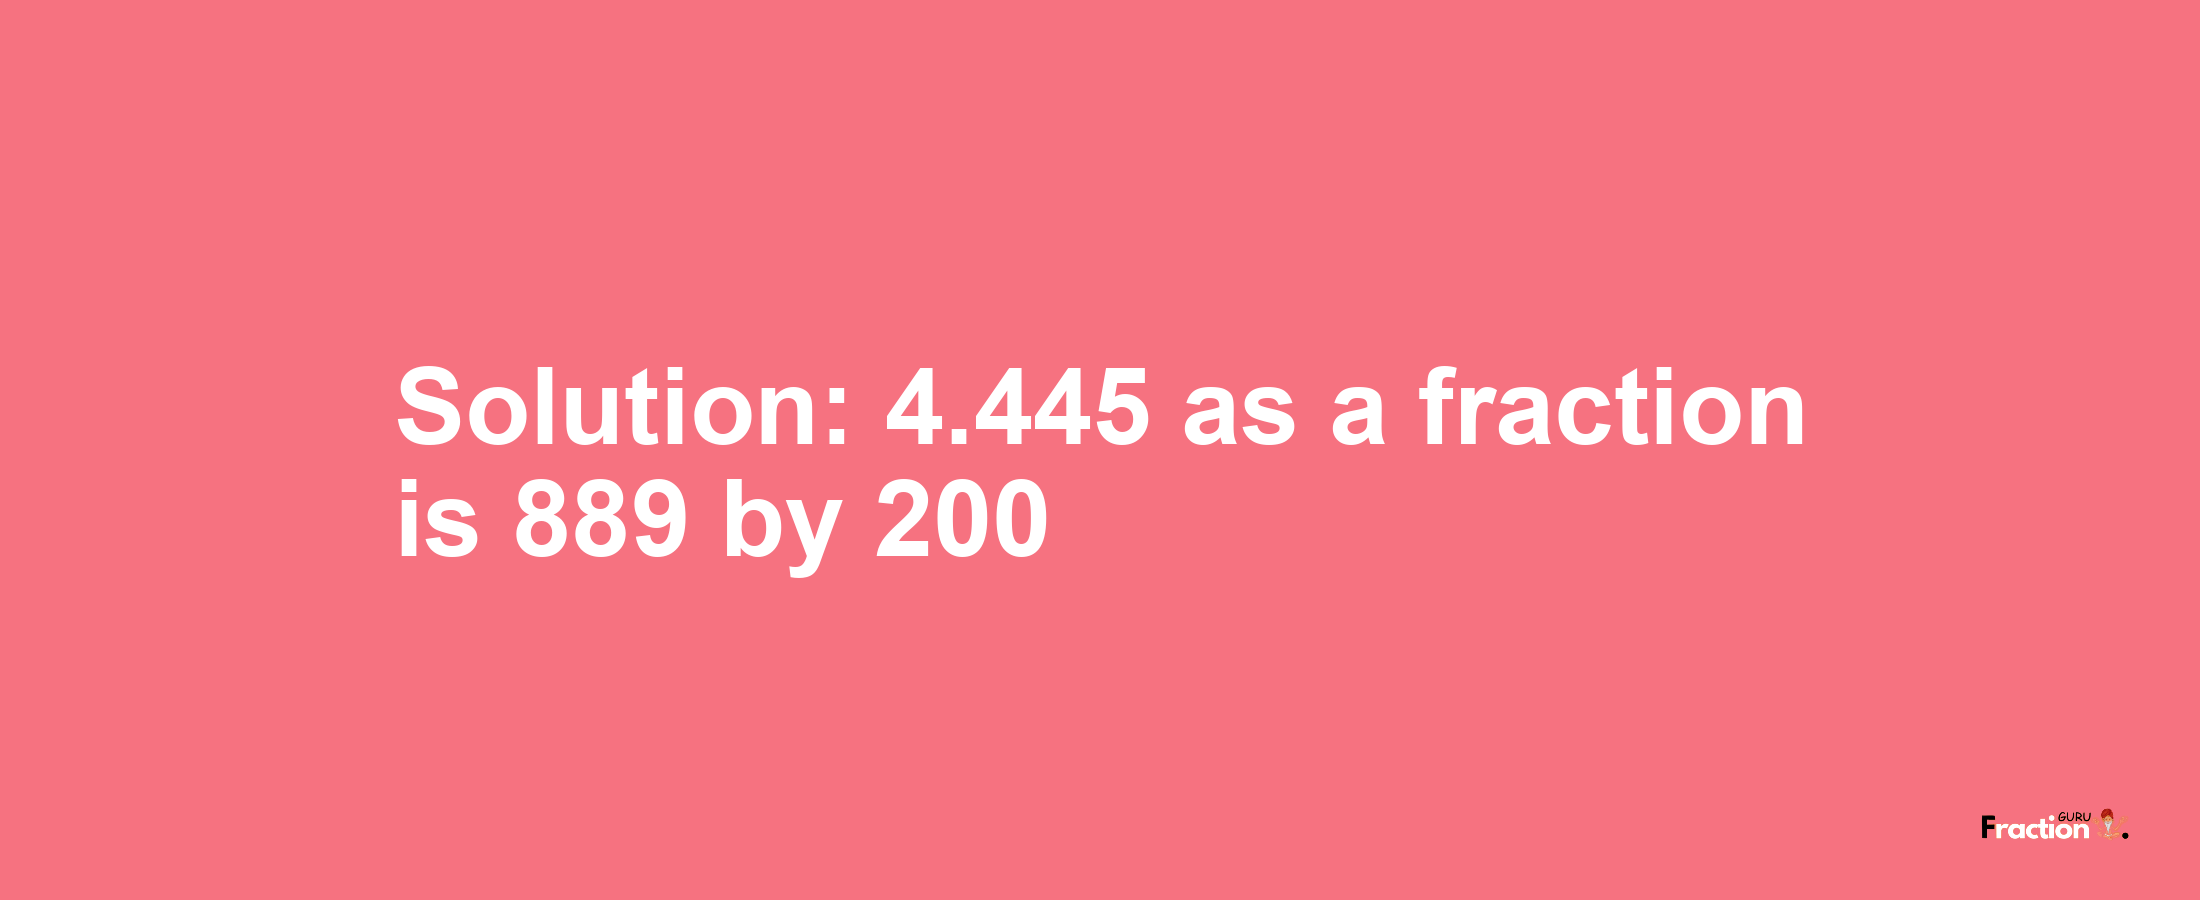 Solution:4.445 as a fraction is 889/200